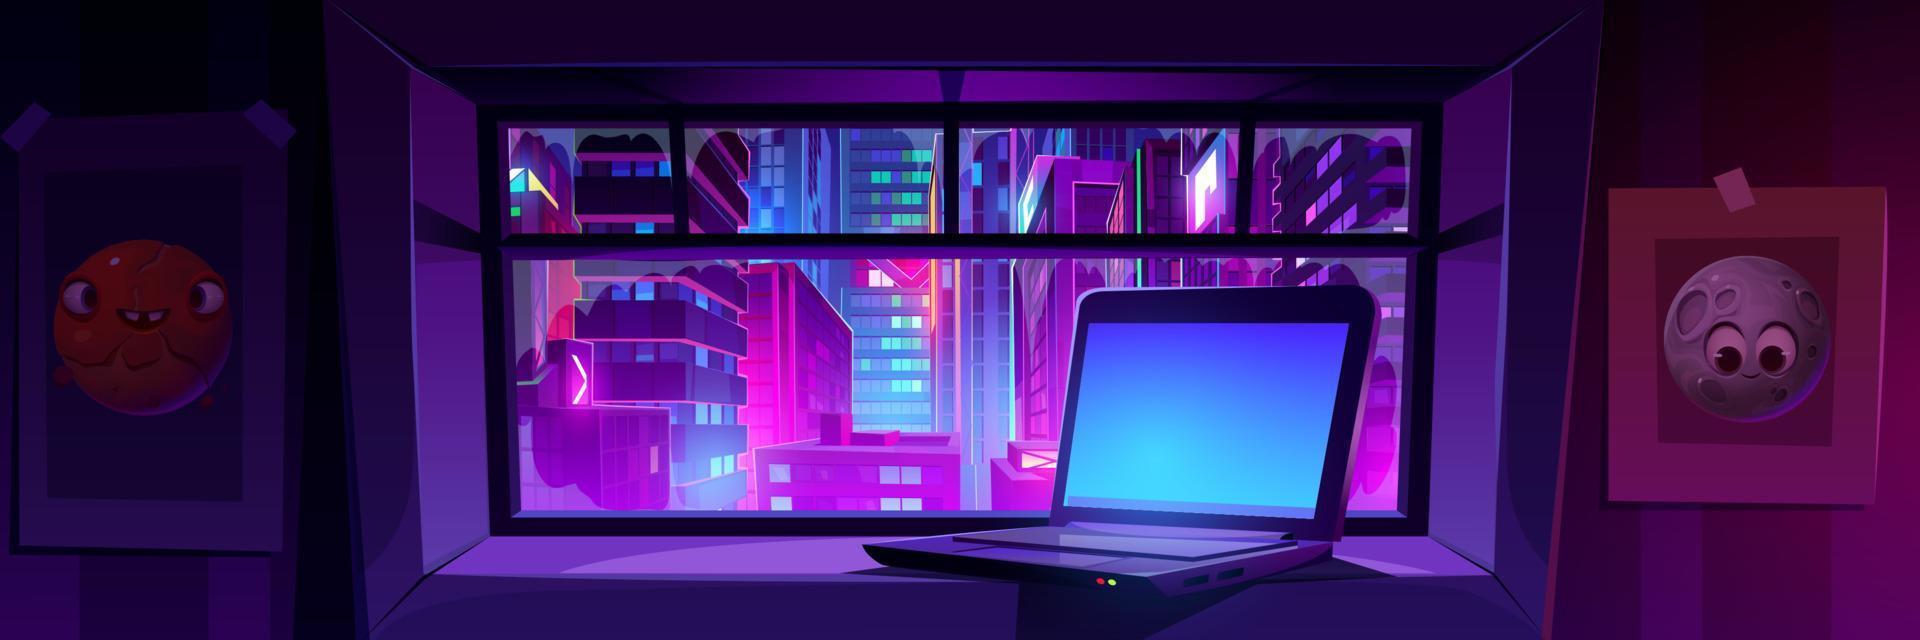 Laptop on window with night city view vector